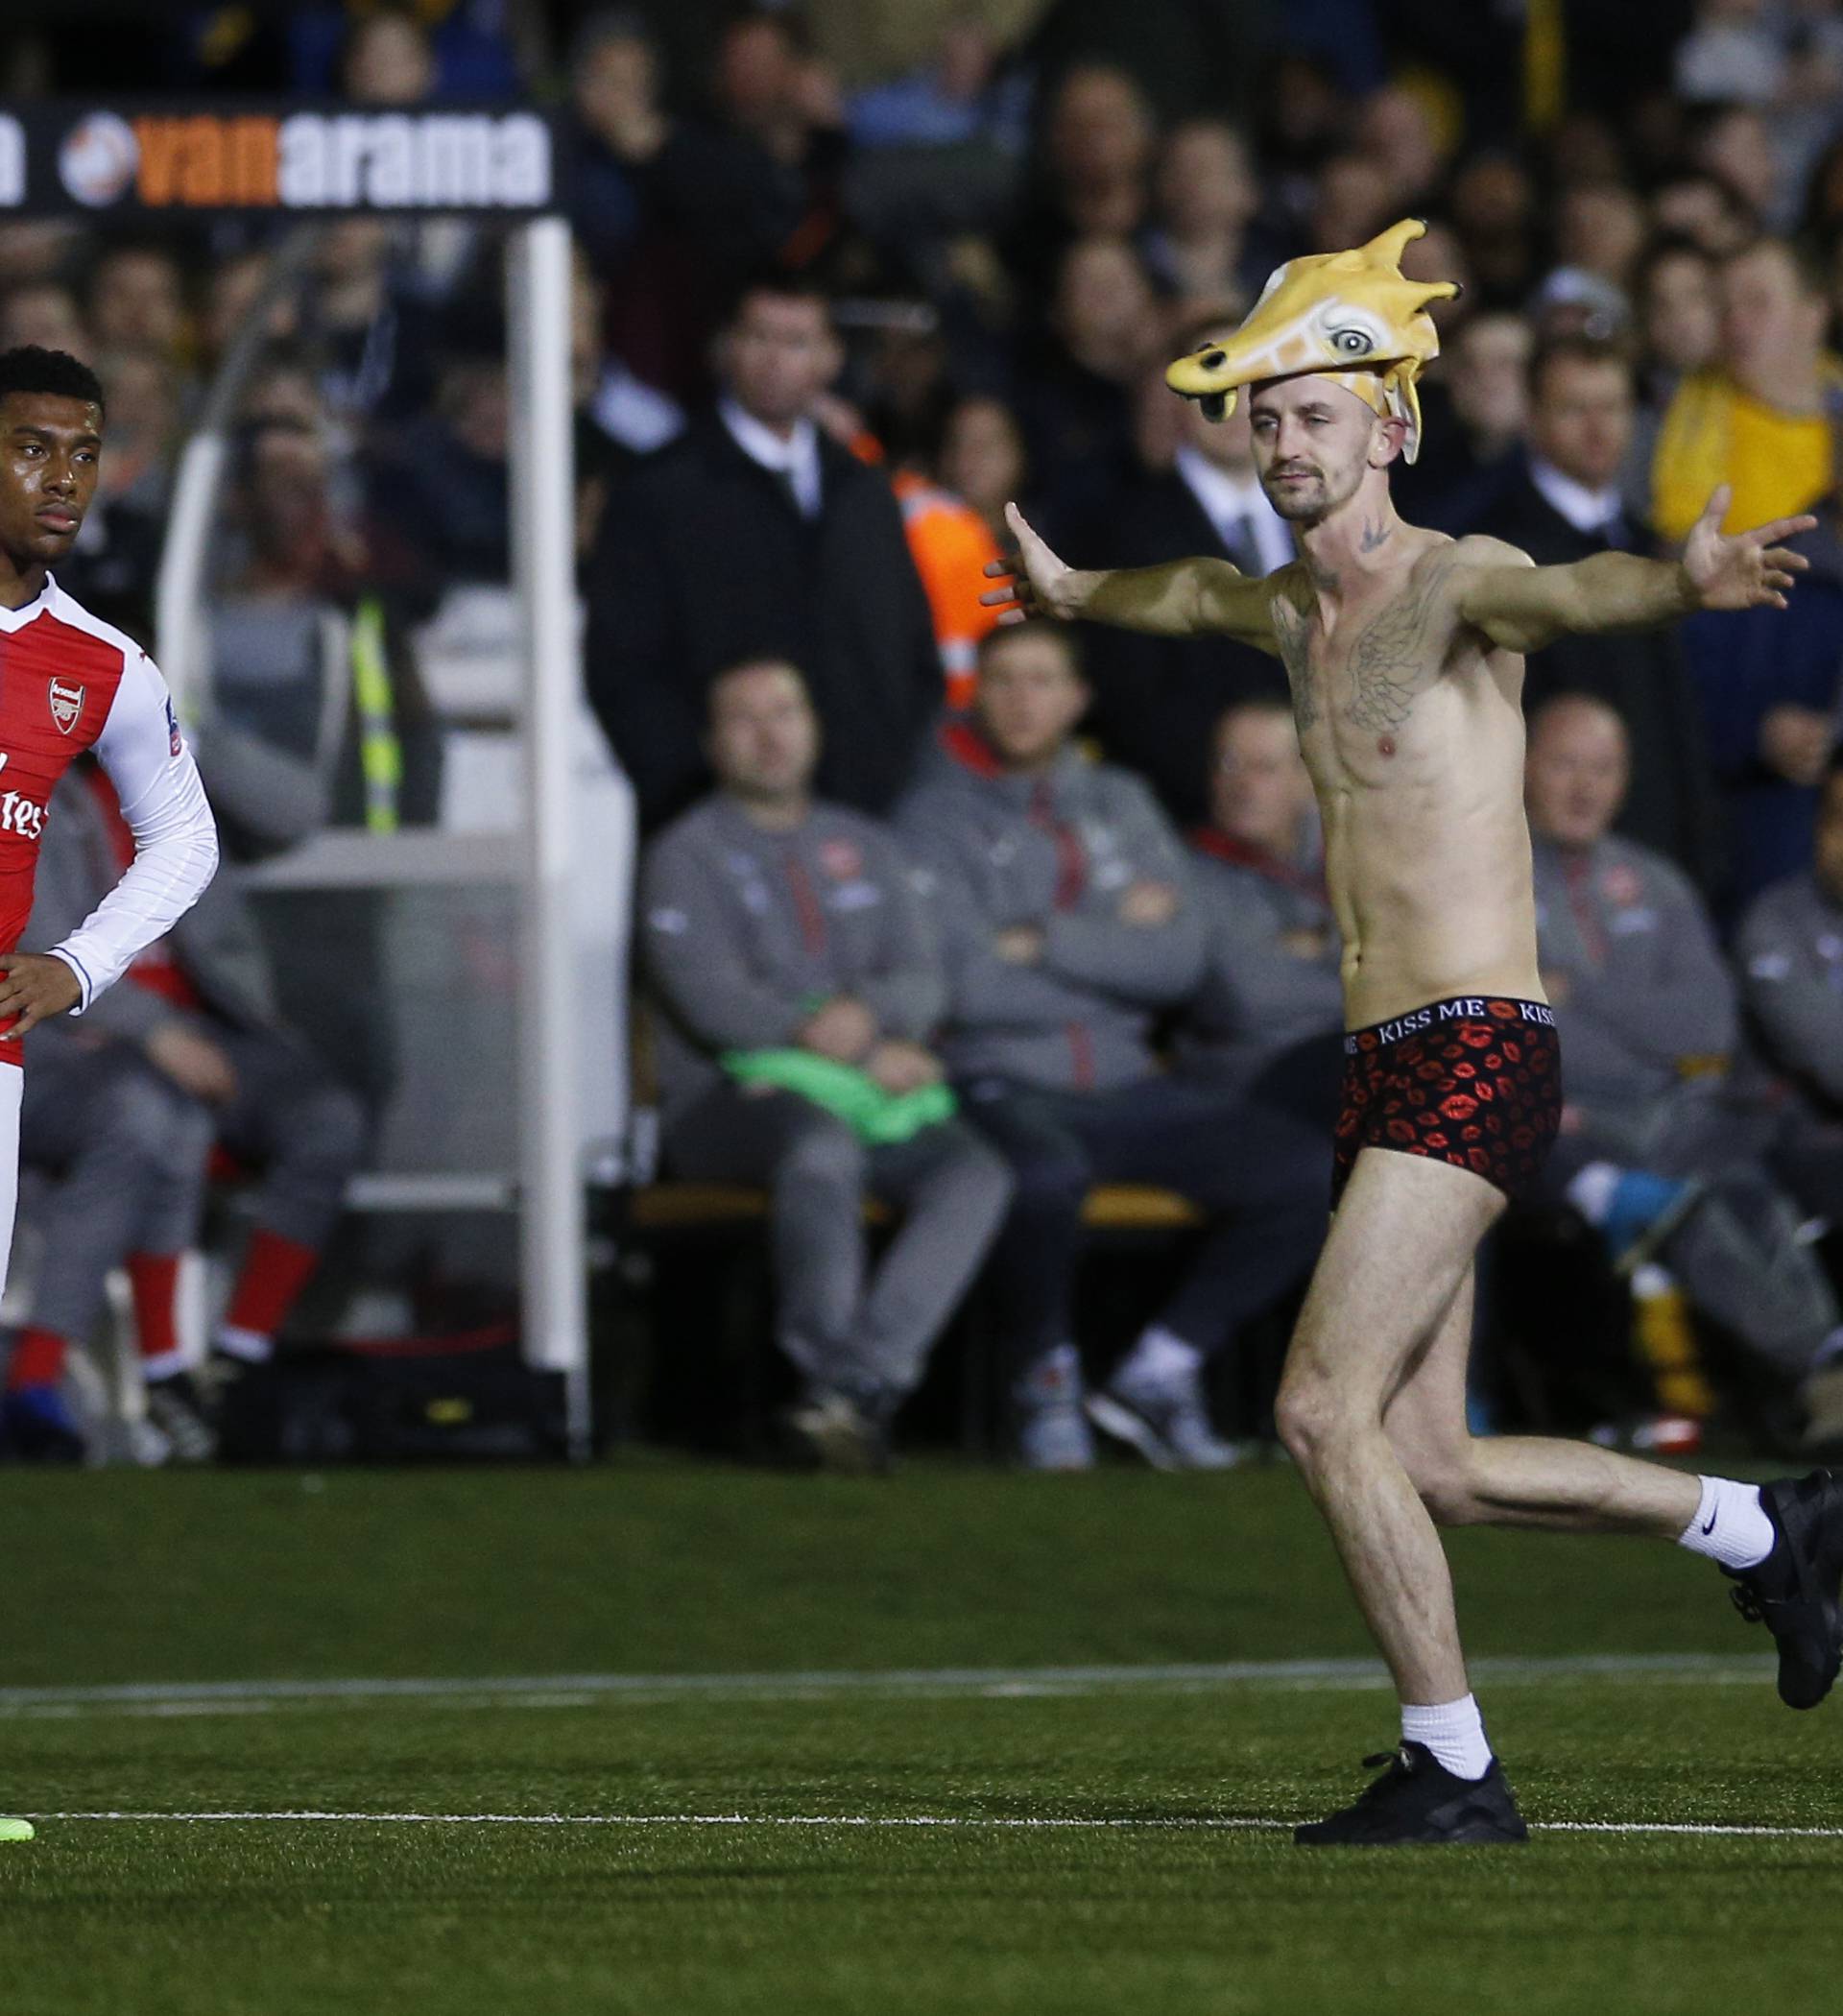 A streaker on the pitch as Arsenal's Alex Iwobi looks on